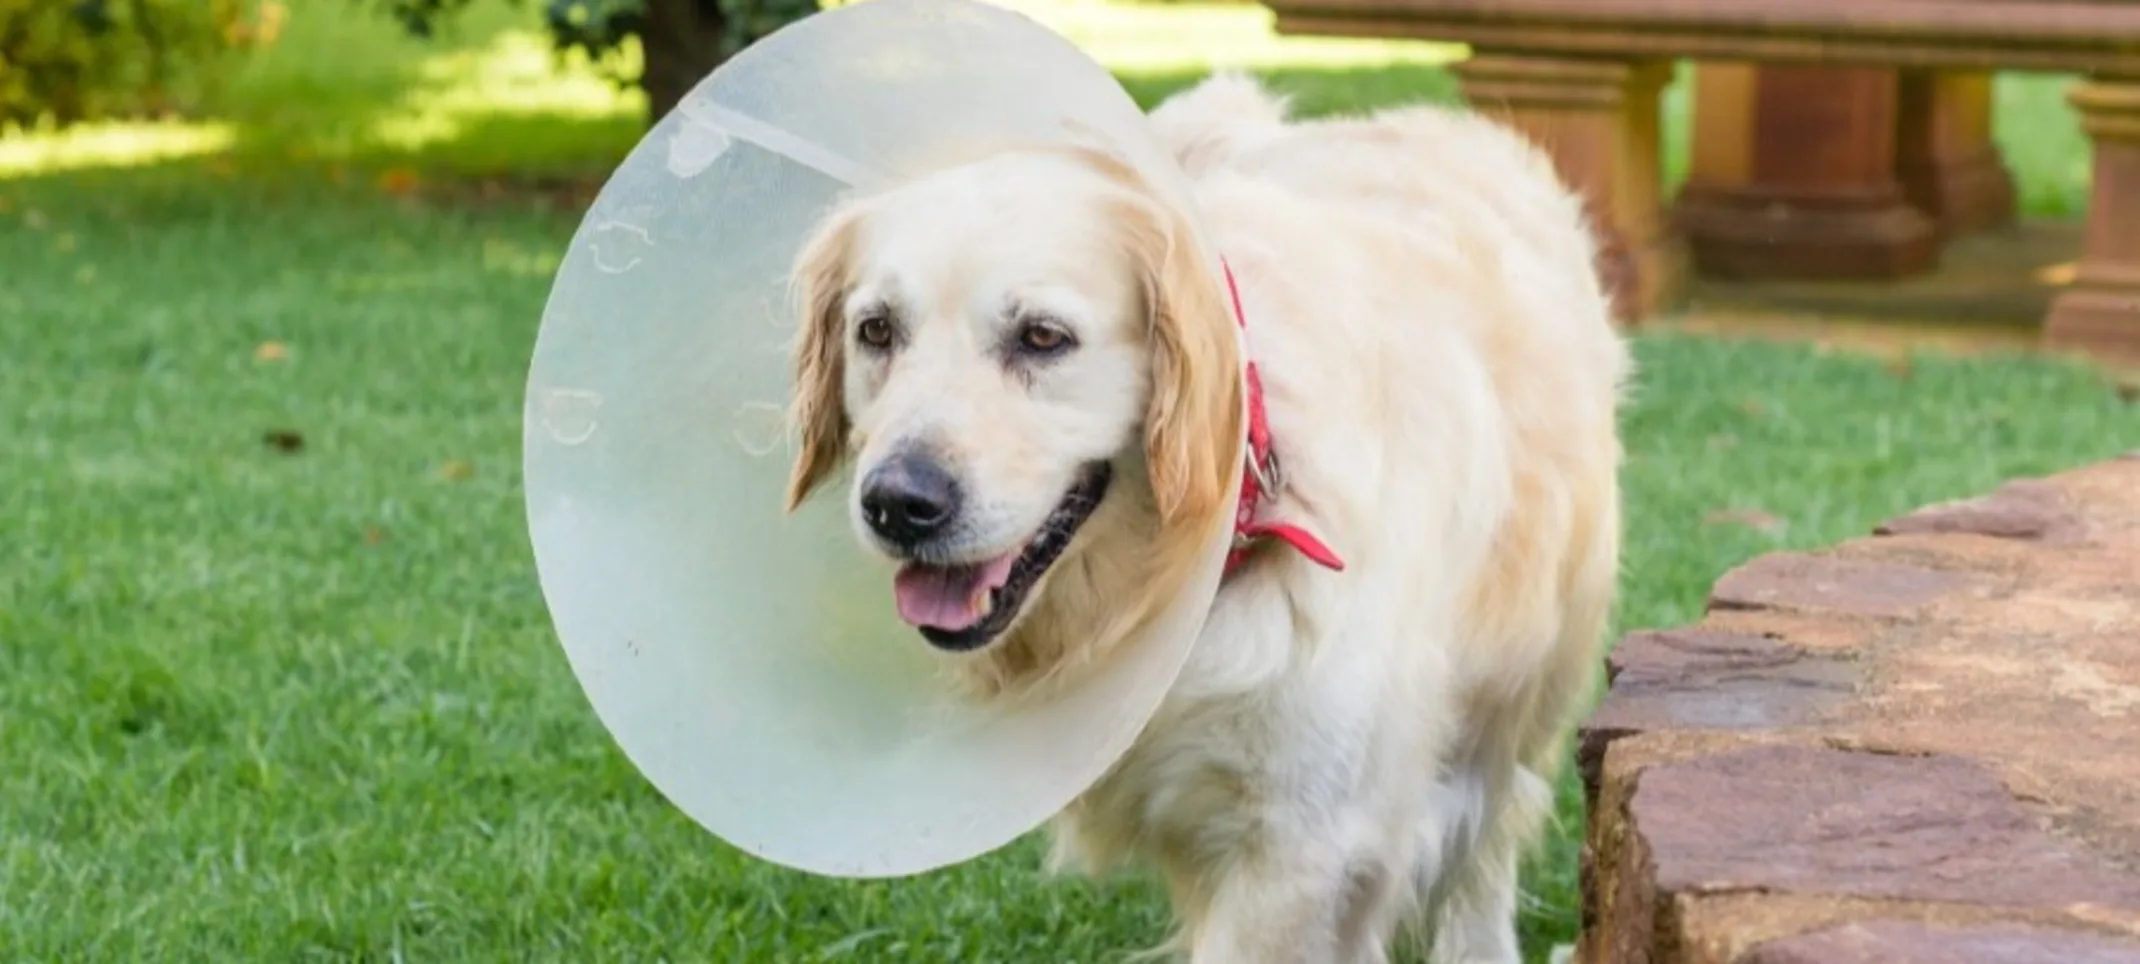 Large dog wearing a cone around its neck while walking outside